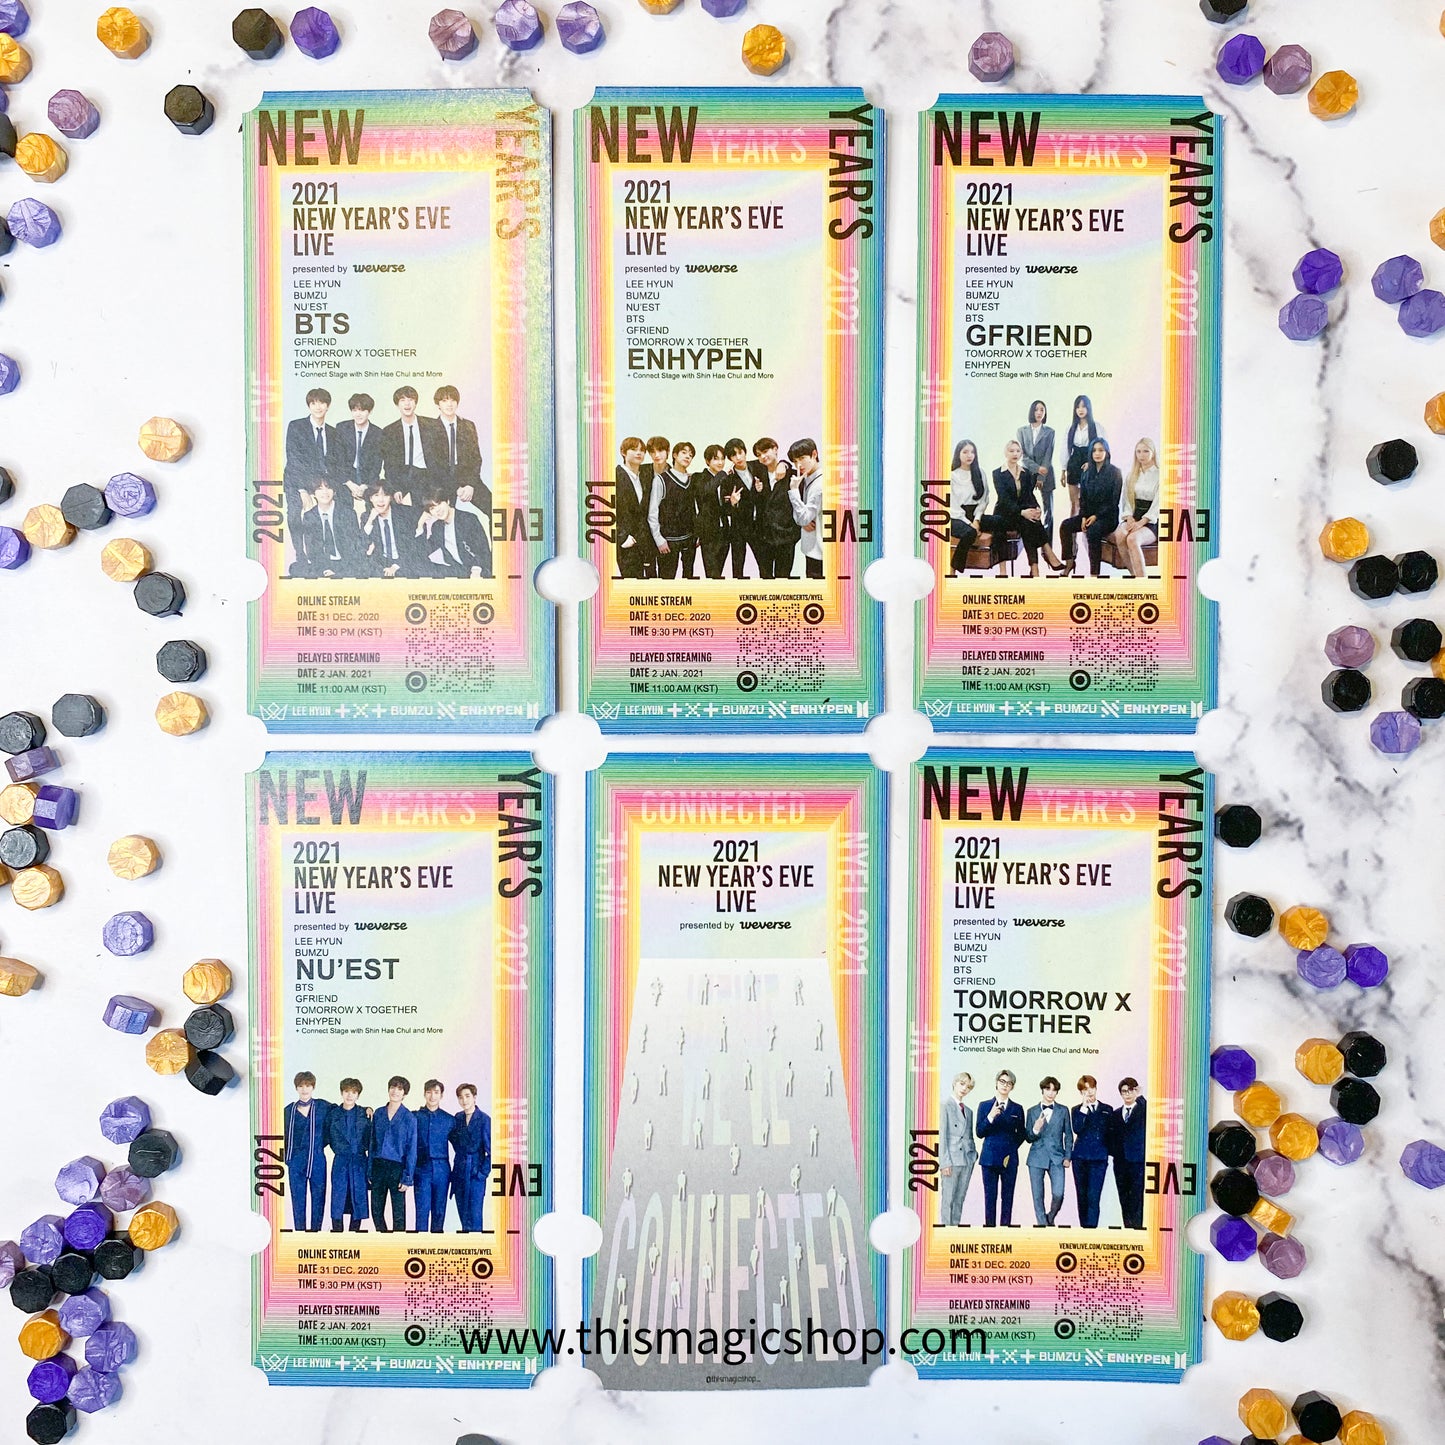 BTS NYEL 2021 New Year's Live commemorative concert ticket